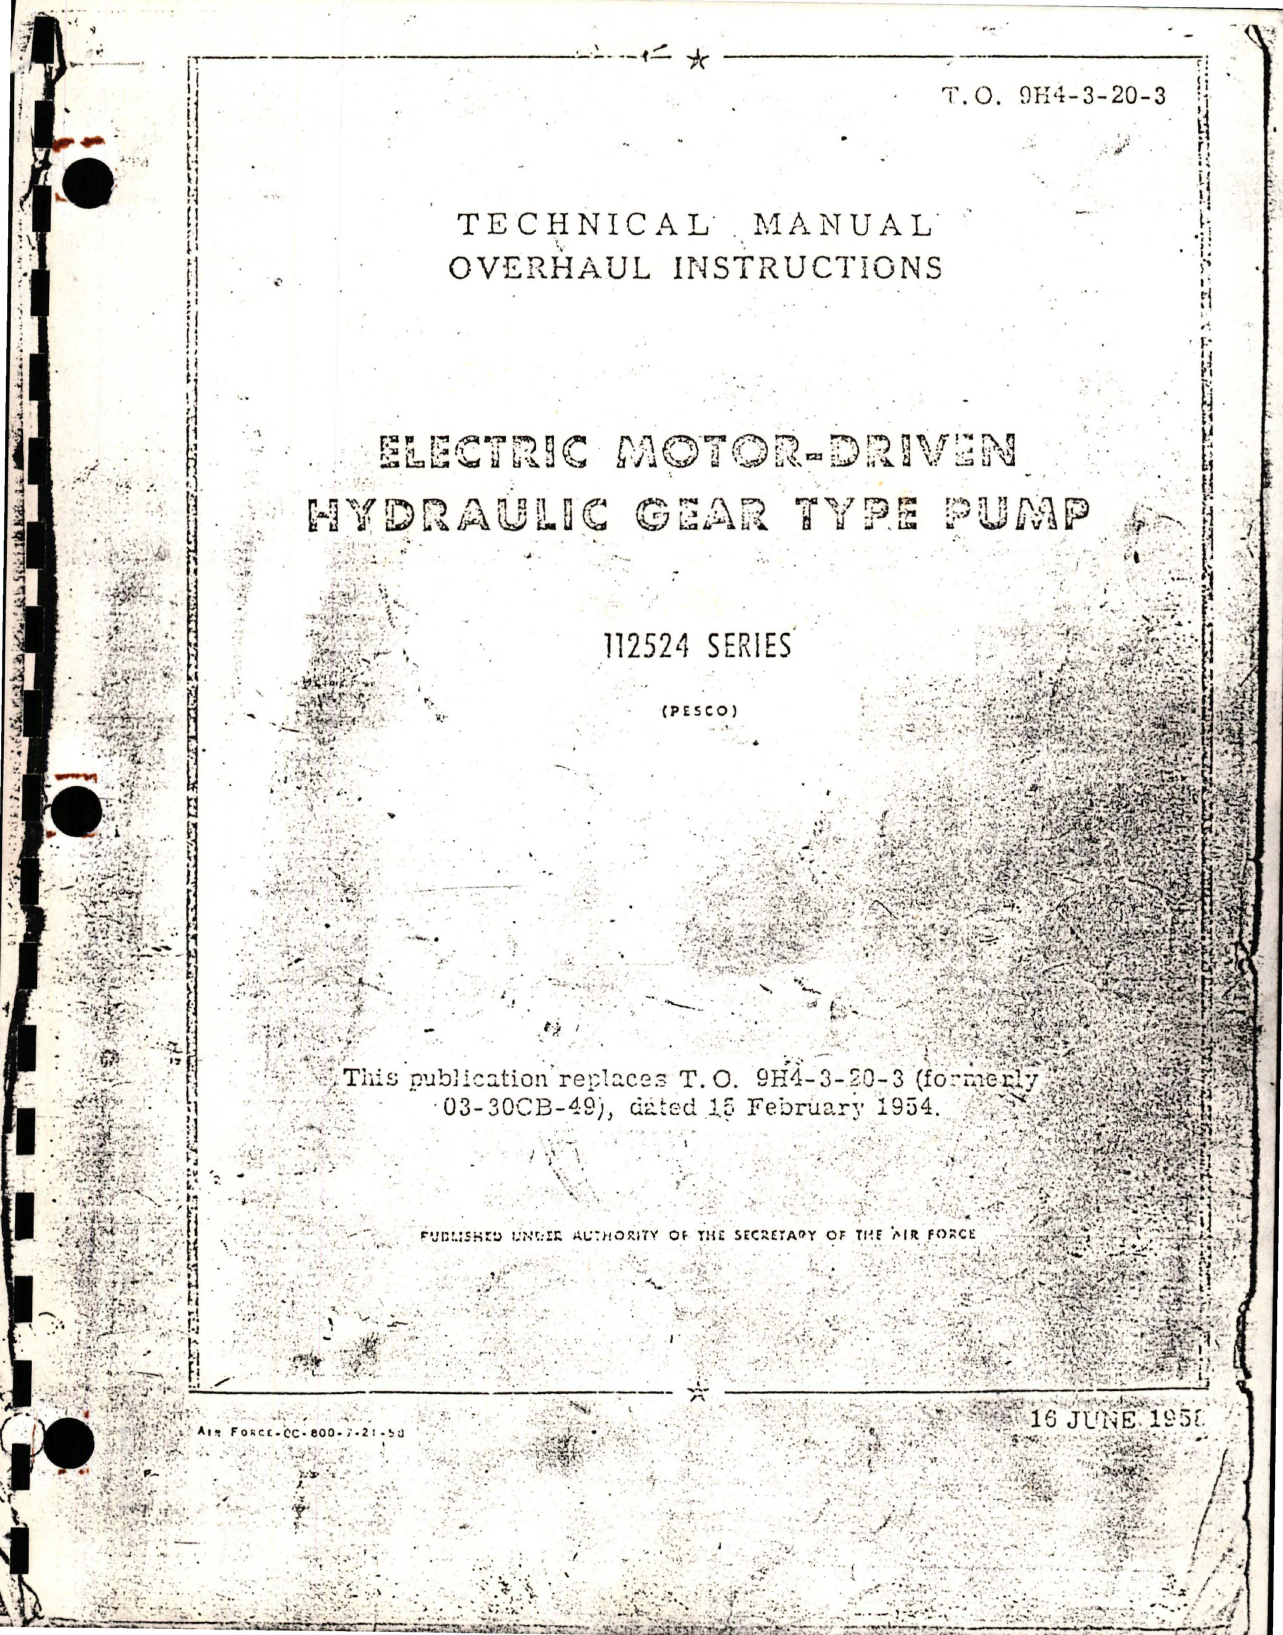 Sample page 1 from AirCorps Library document: Overhaul Instructions for Electric Motor-Driven Hydraulic Gear Type Pump - 112524 Series 